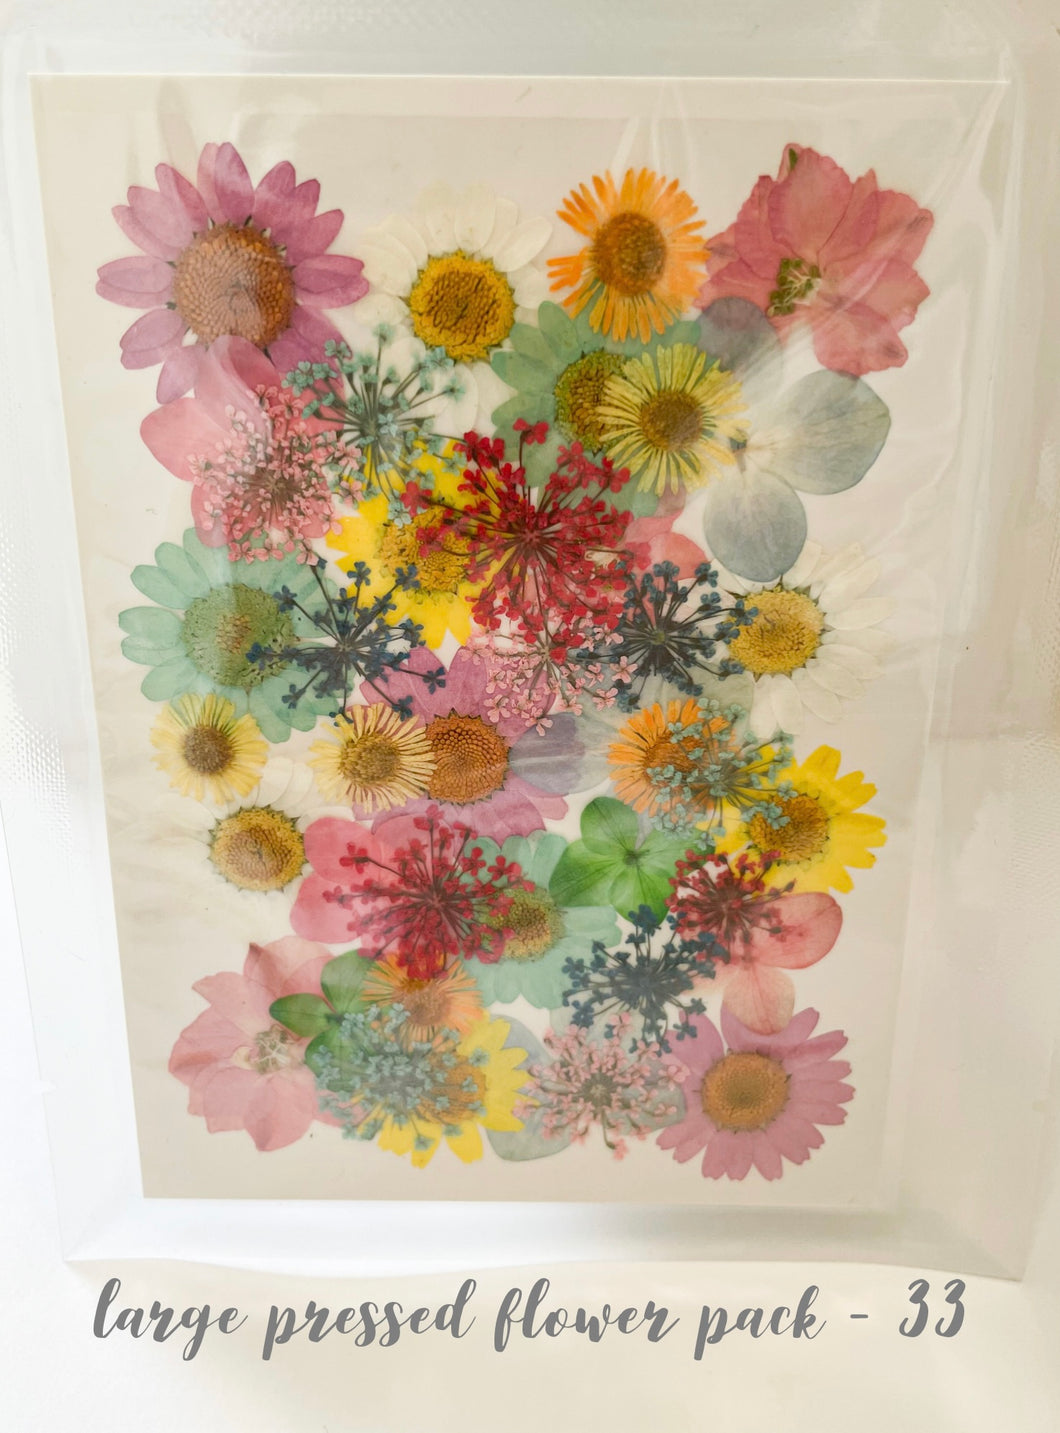 Large Dried Pressed Flower Pack - 33